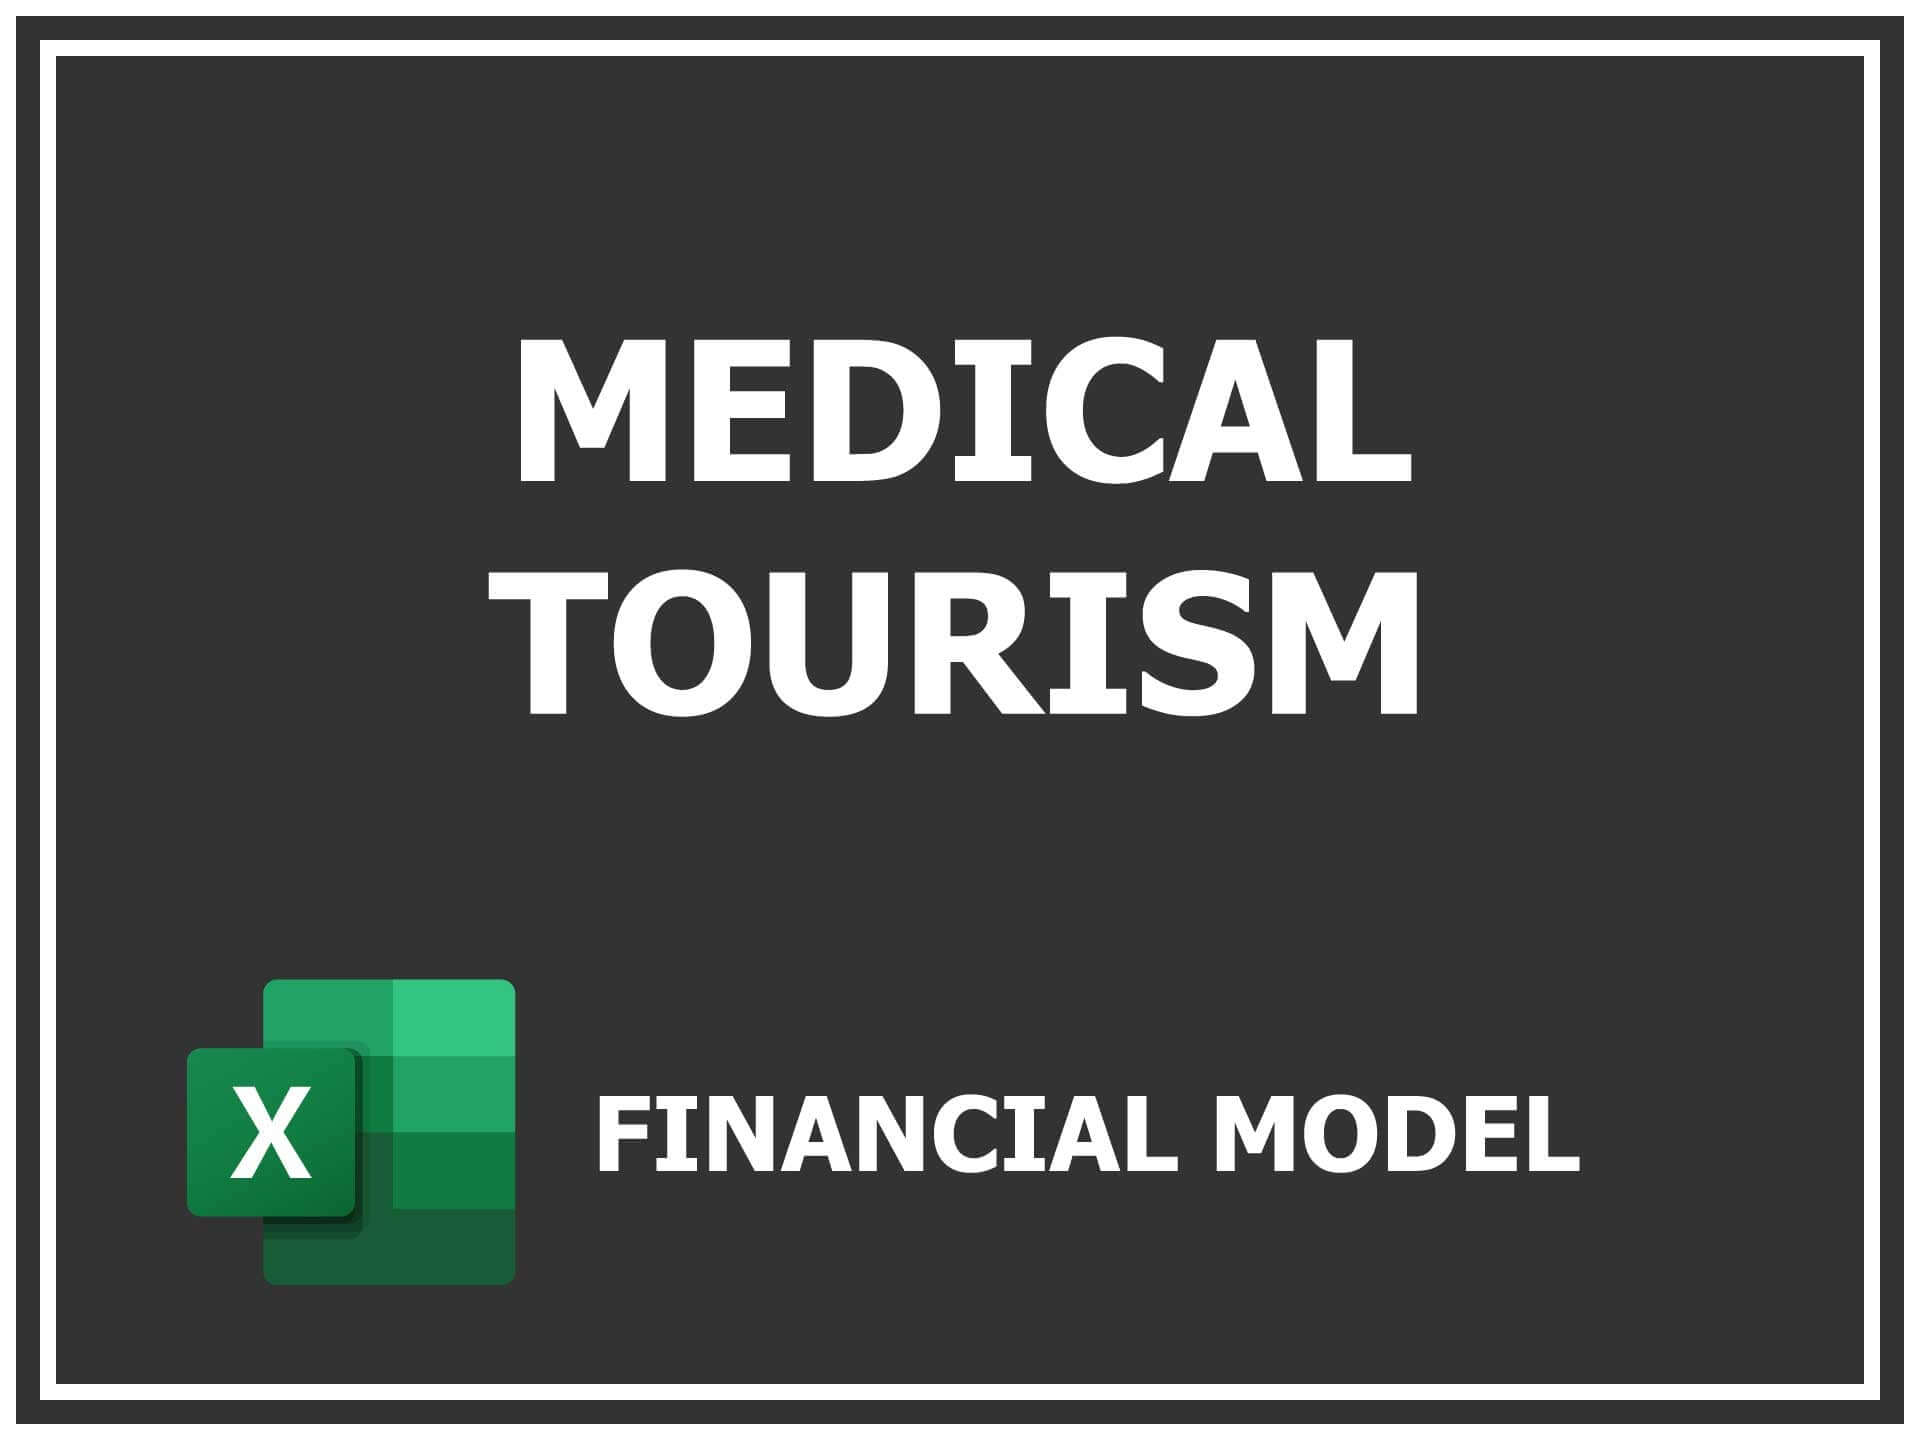 business plan for medical tourism company